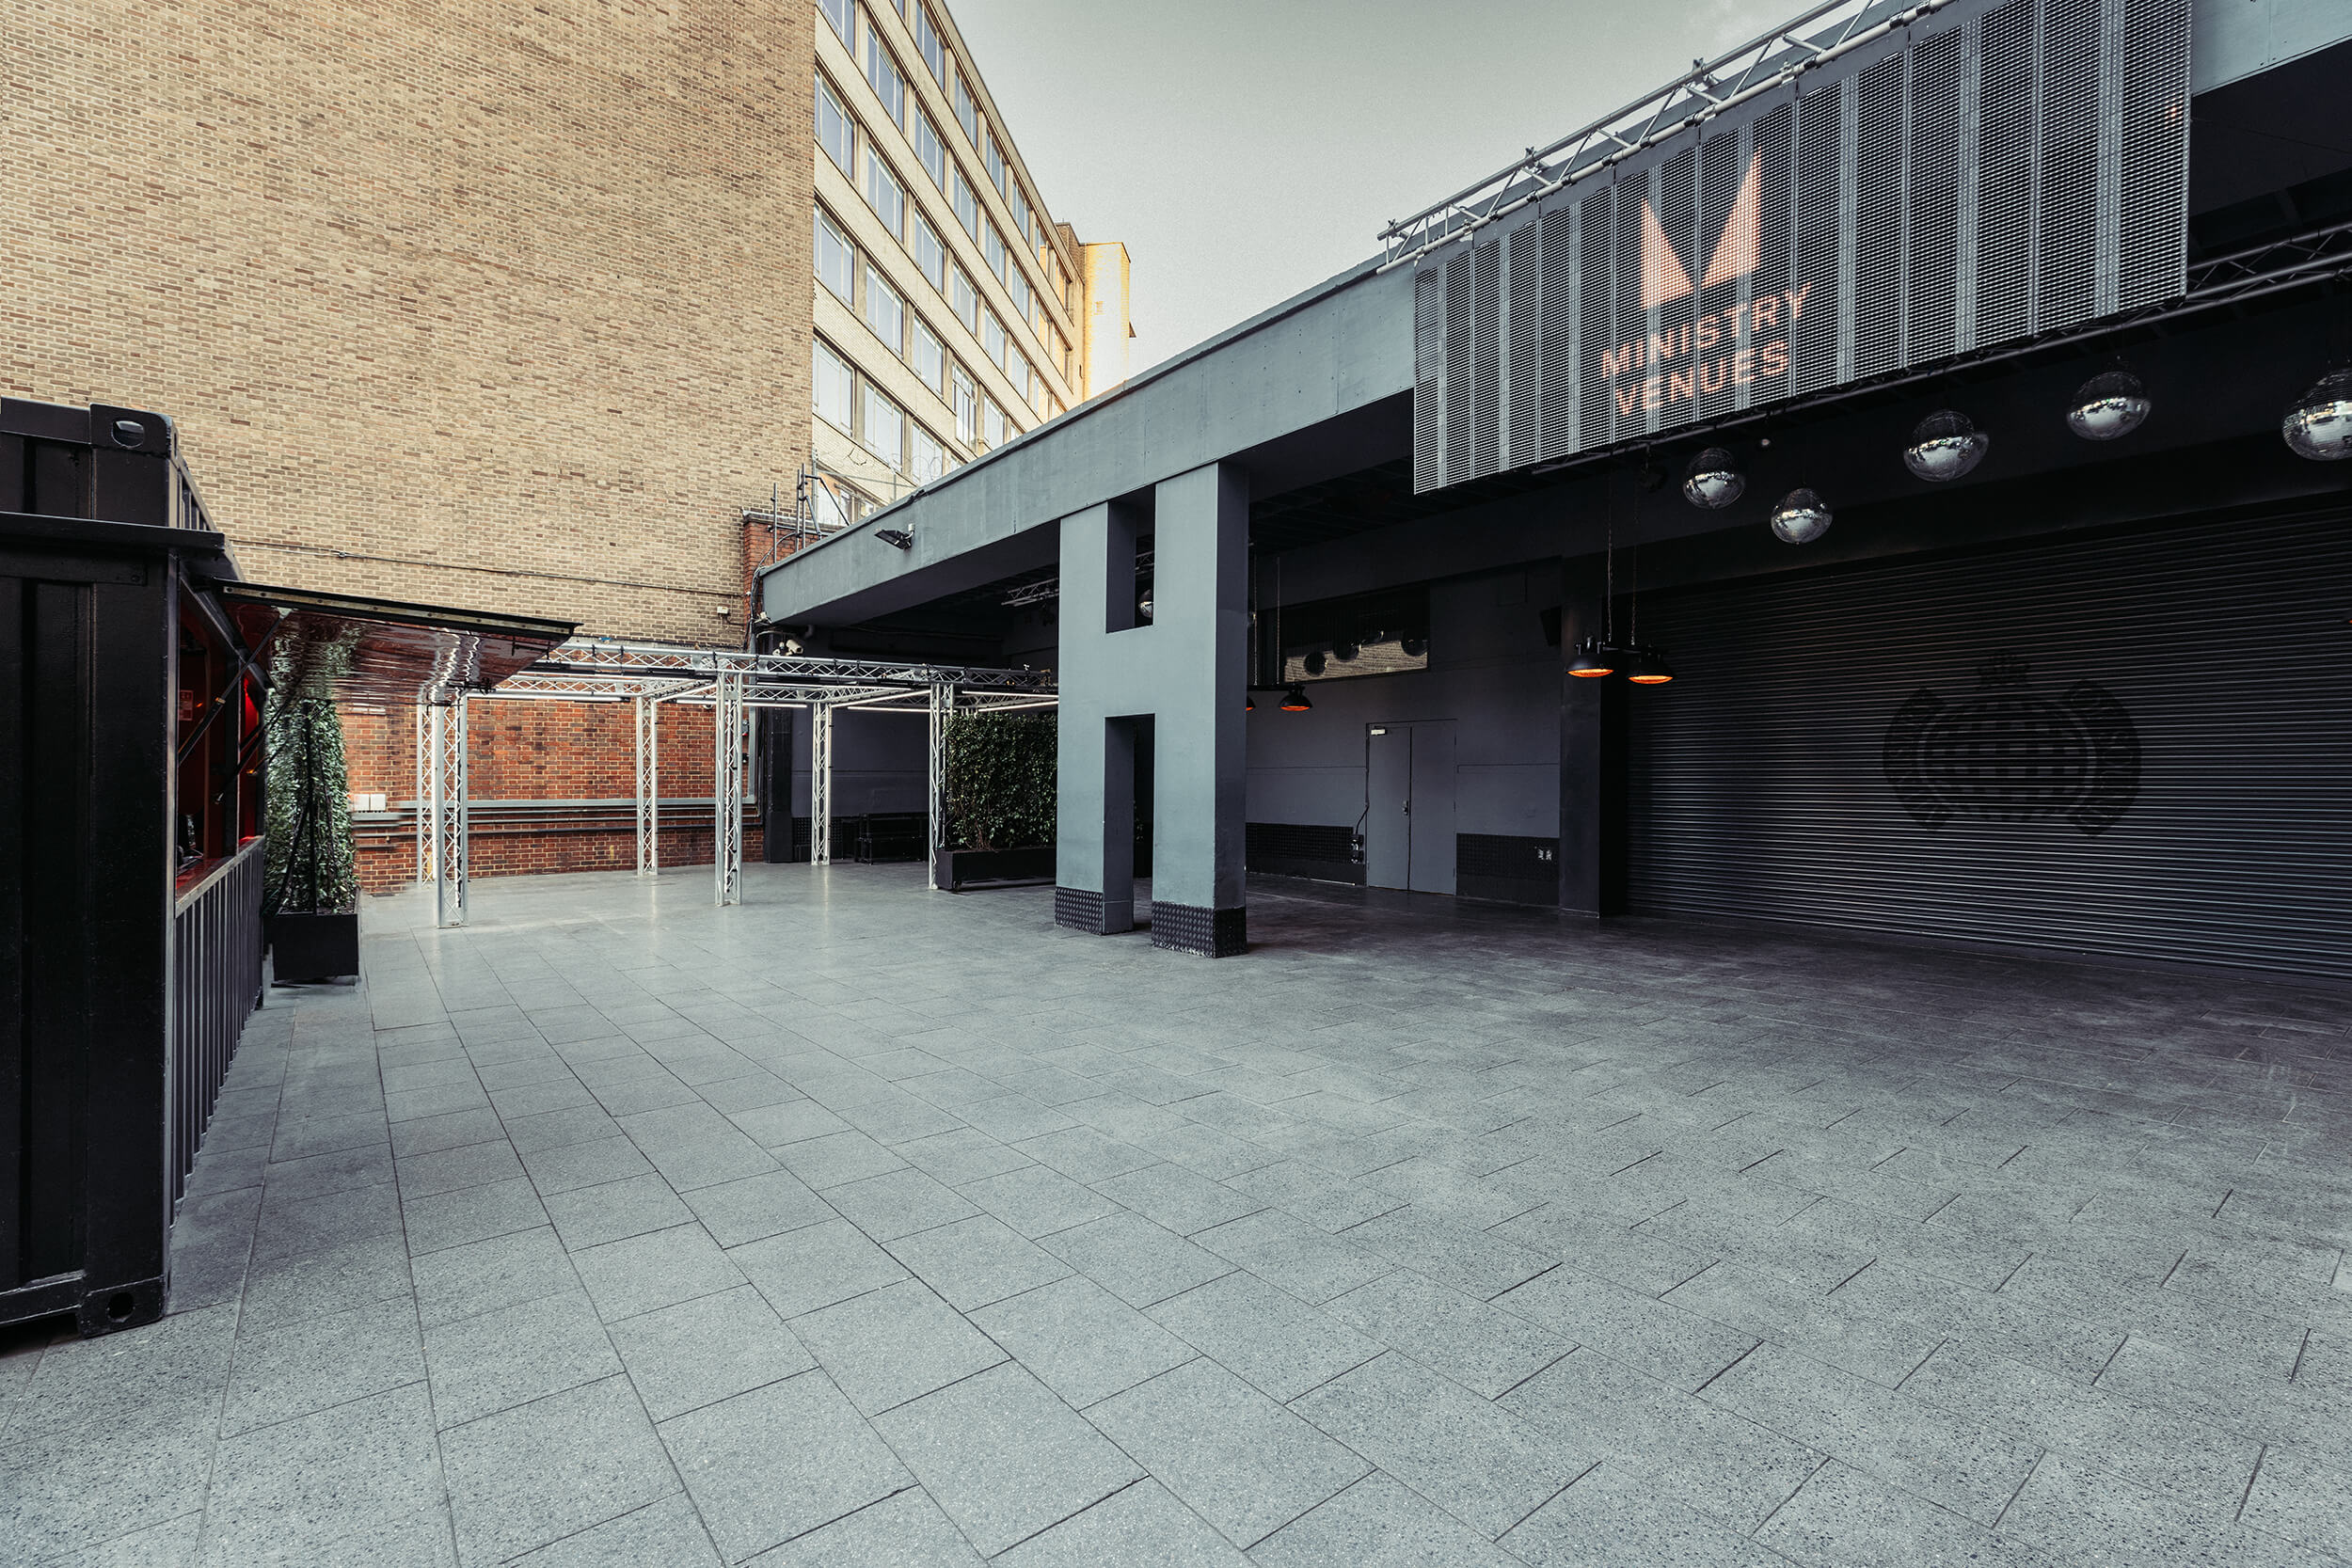 The Courtyard- The Ministry of Sound